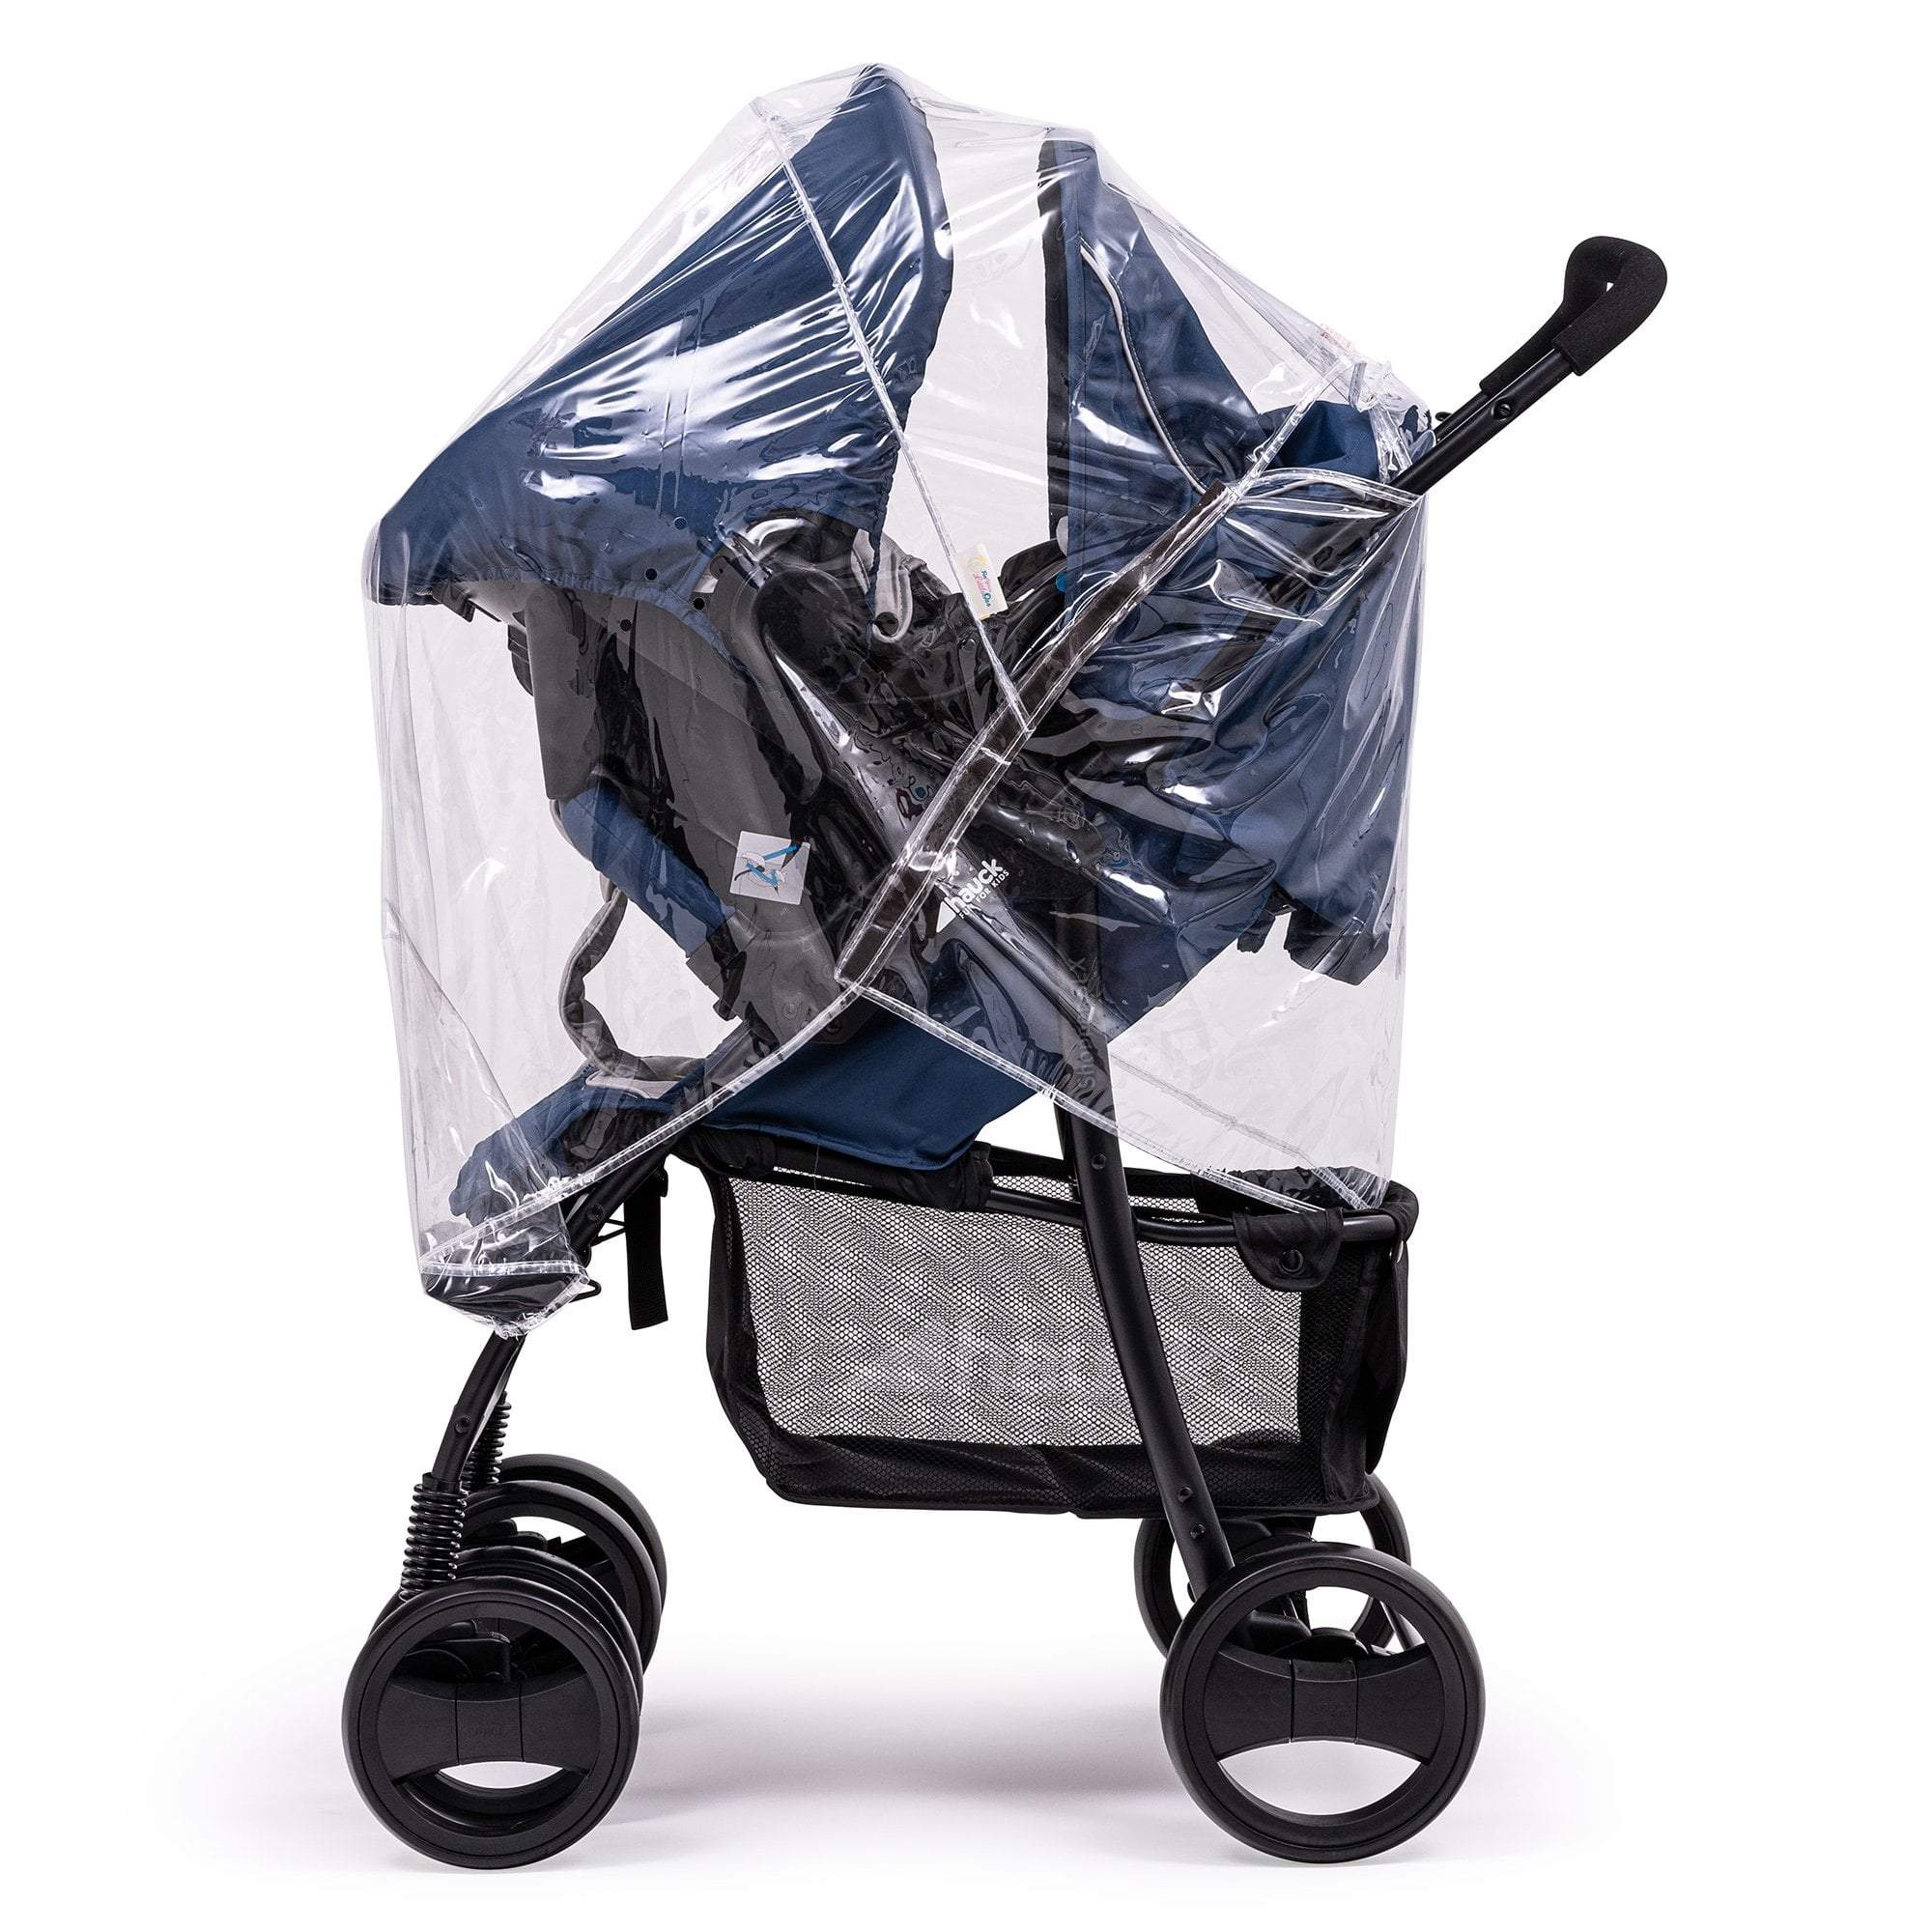 Travel System Raincover Compatible with Valco - Fits All Models - For Your Little One